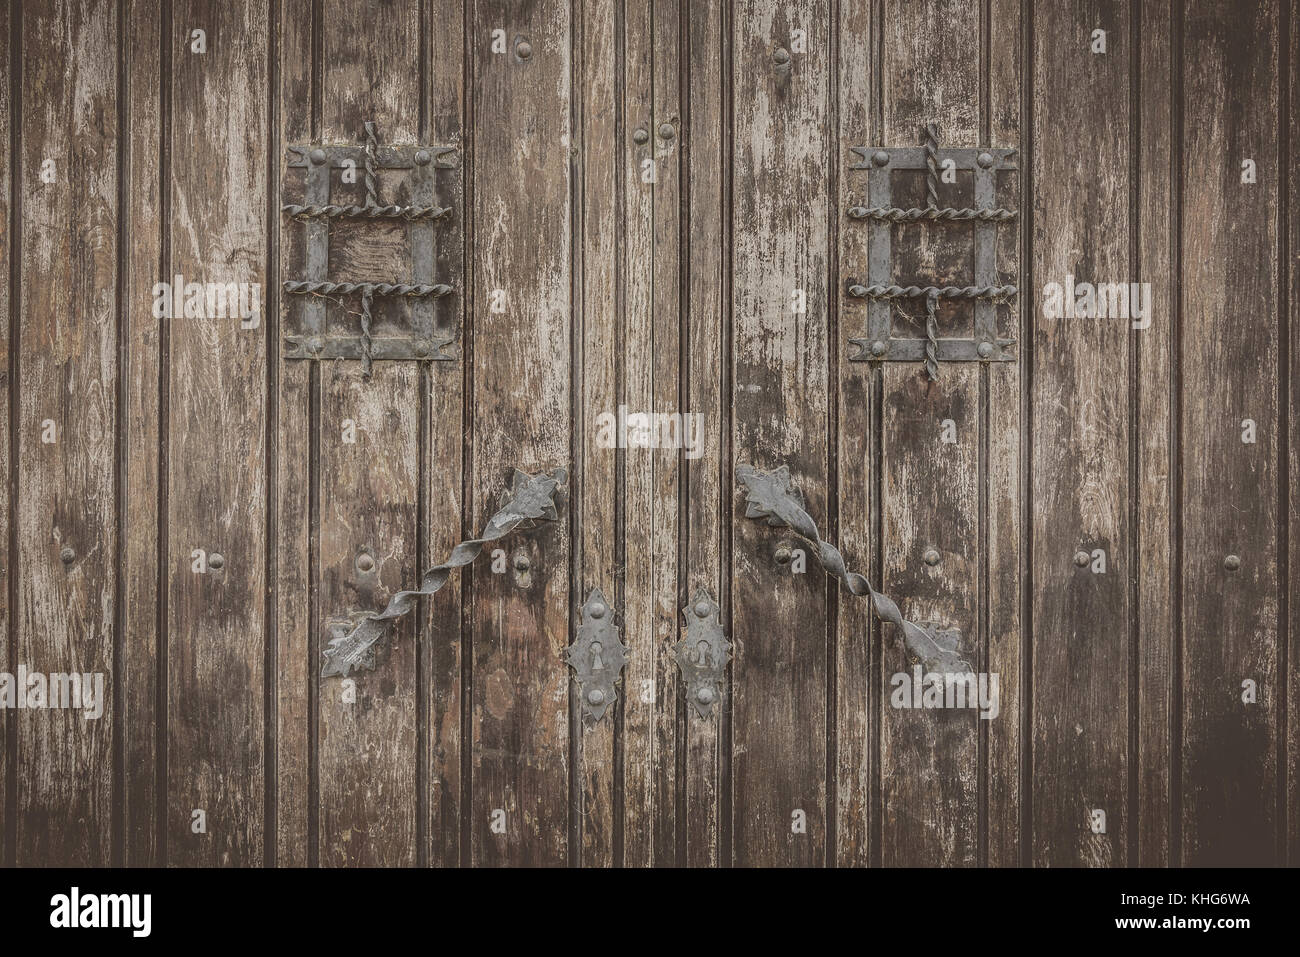 Rustic wooden textured door with wrought Iron fittings Stock Photo